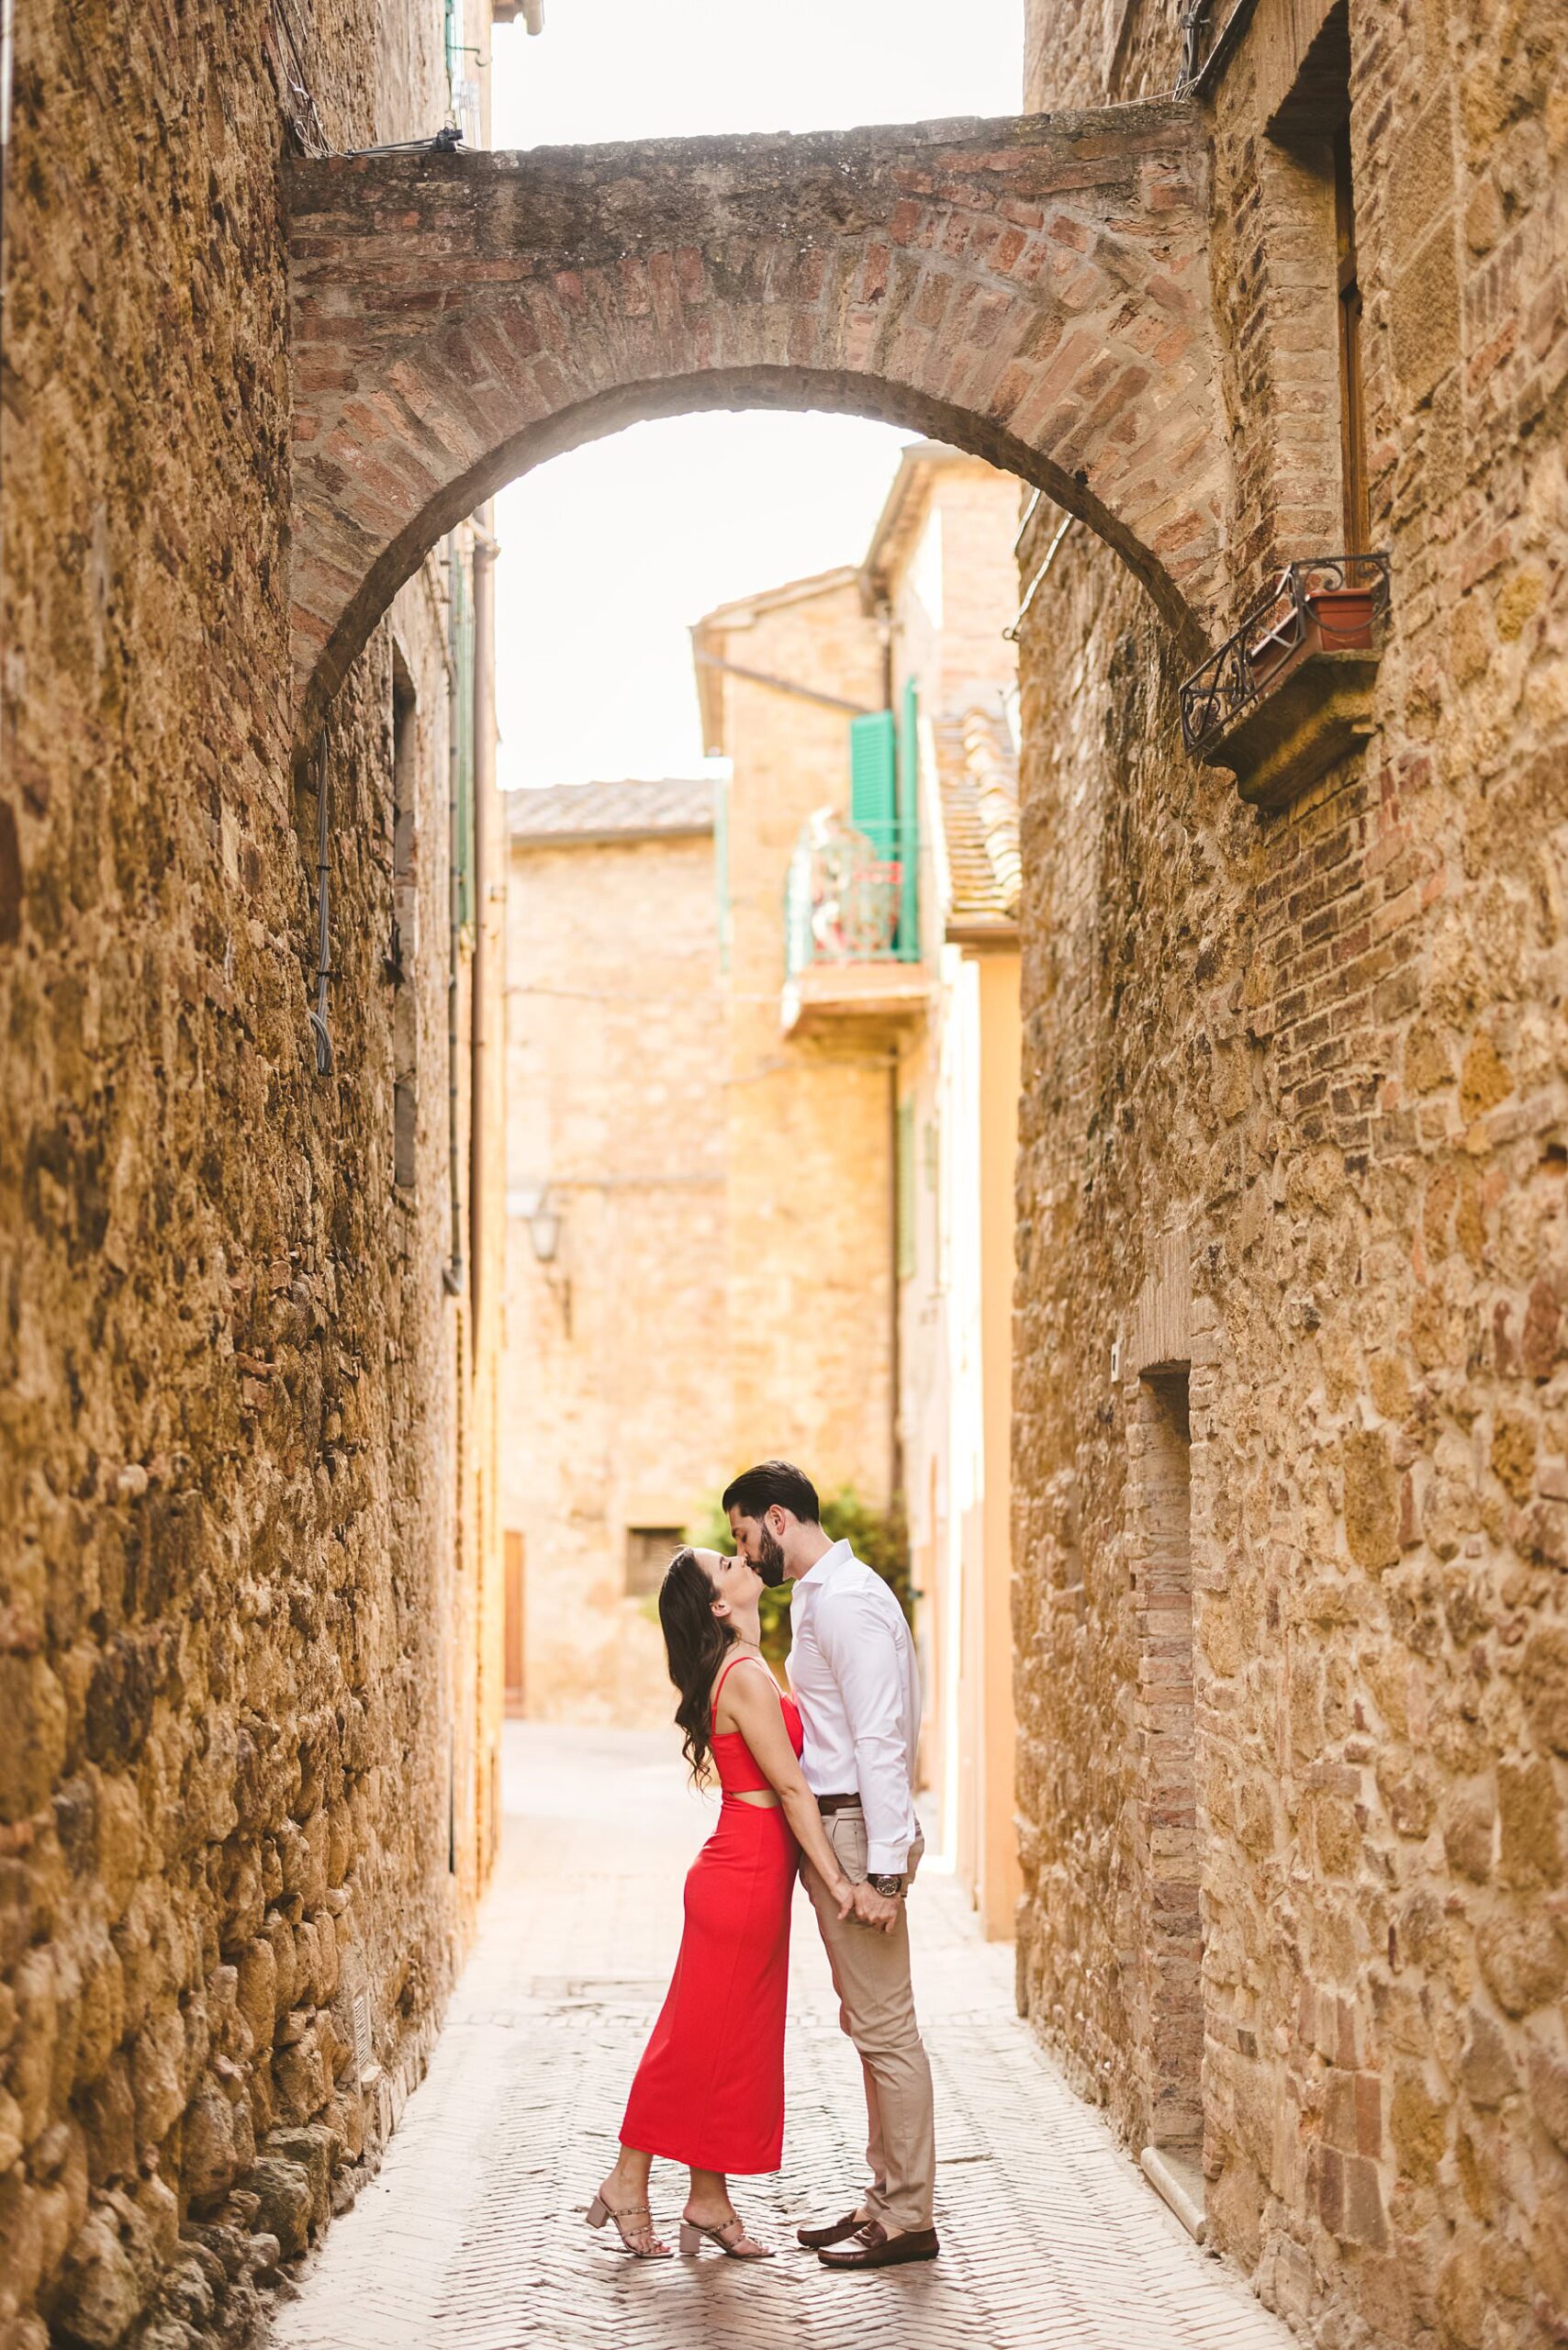 Elegant and classic couple portrait photo shoot during summer vacation in Tuscany all around Val d’Orcia